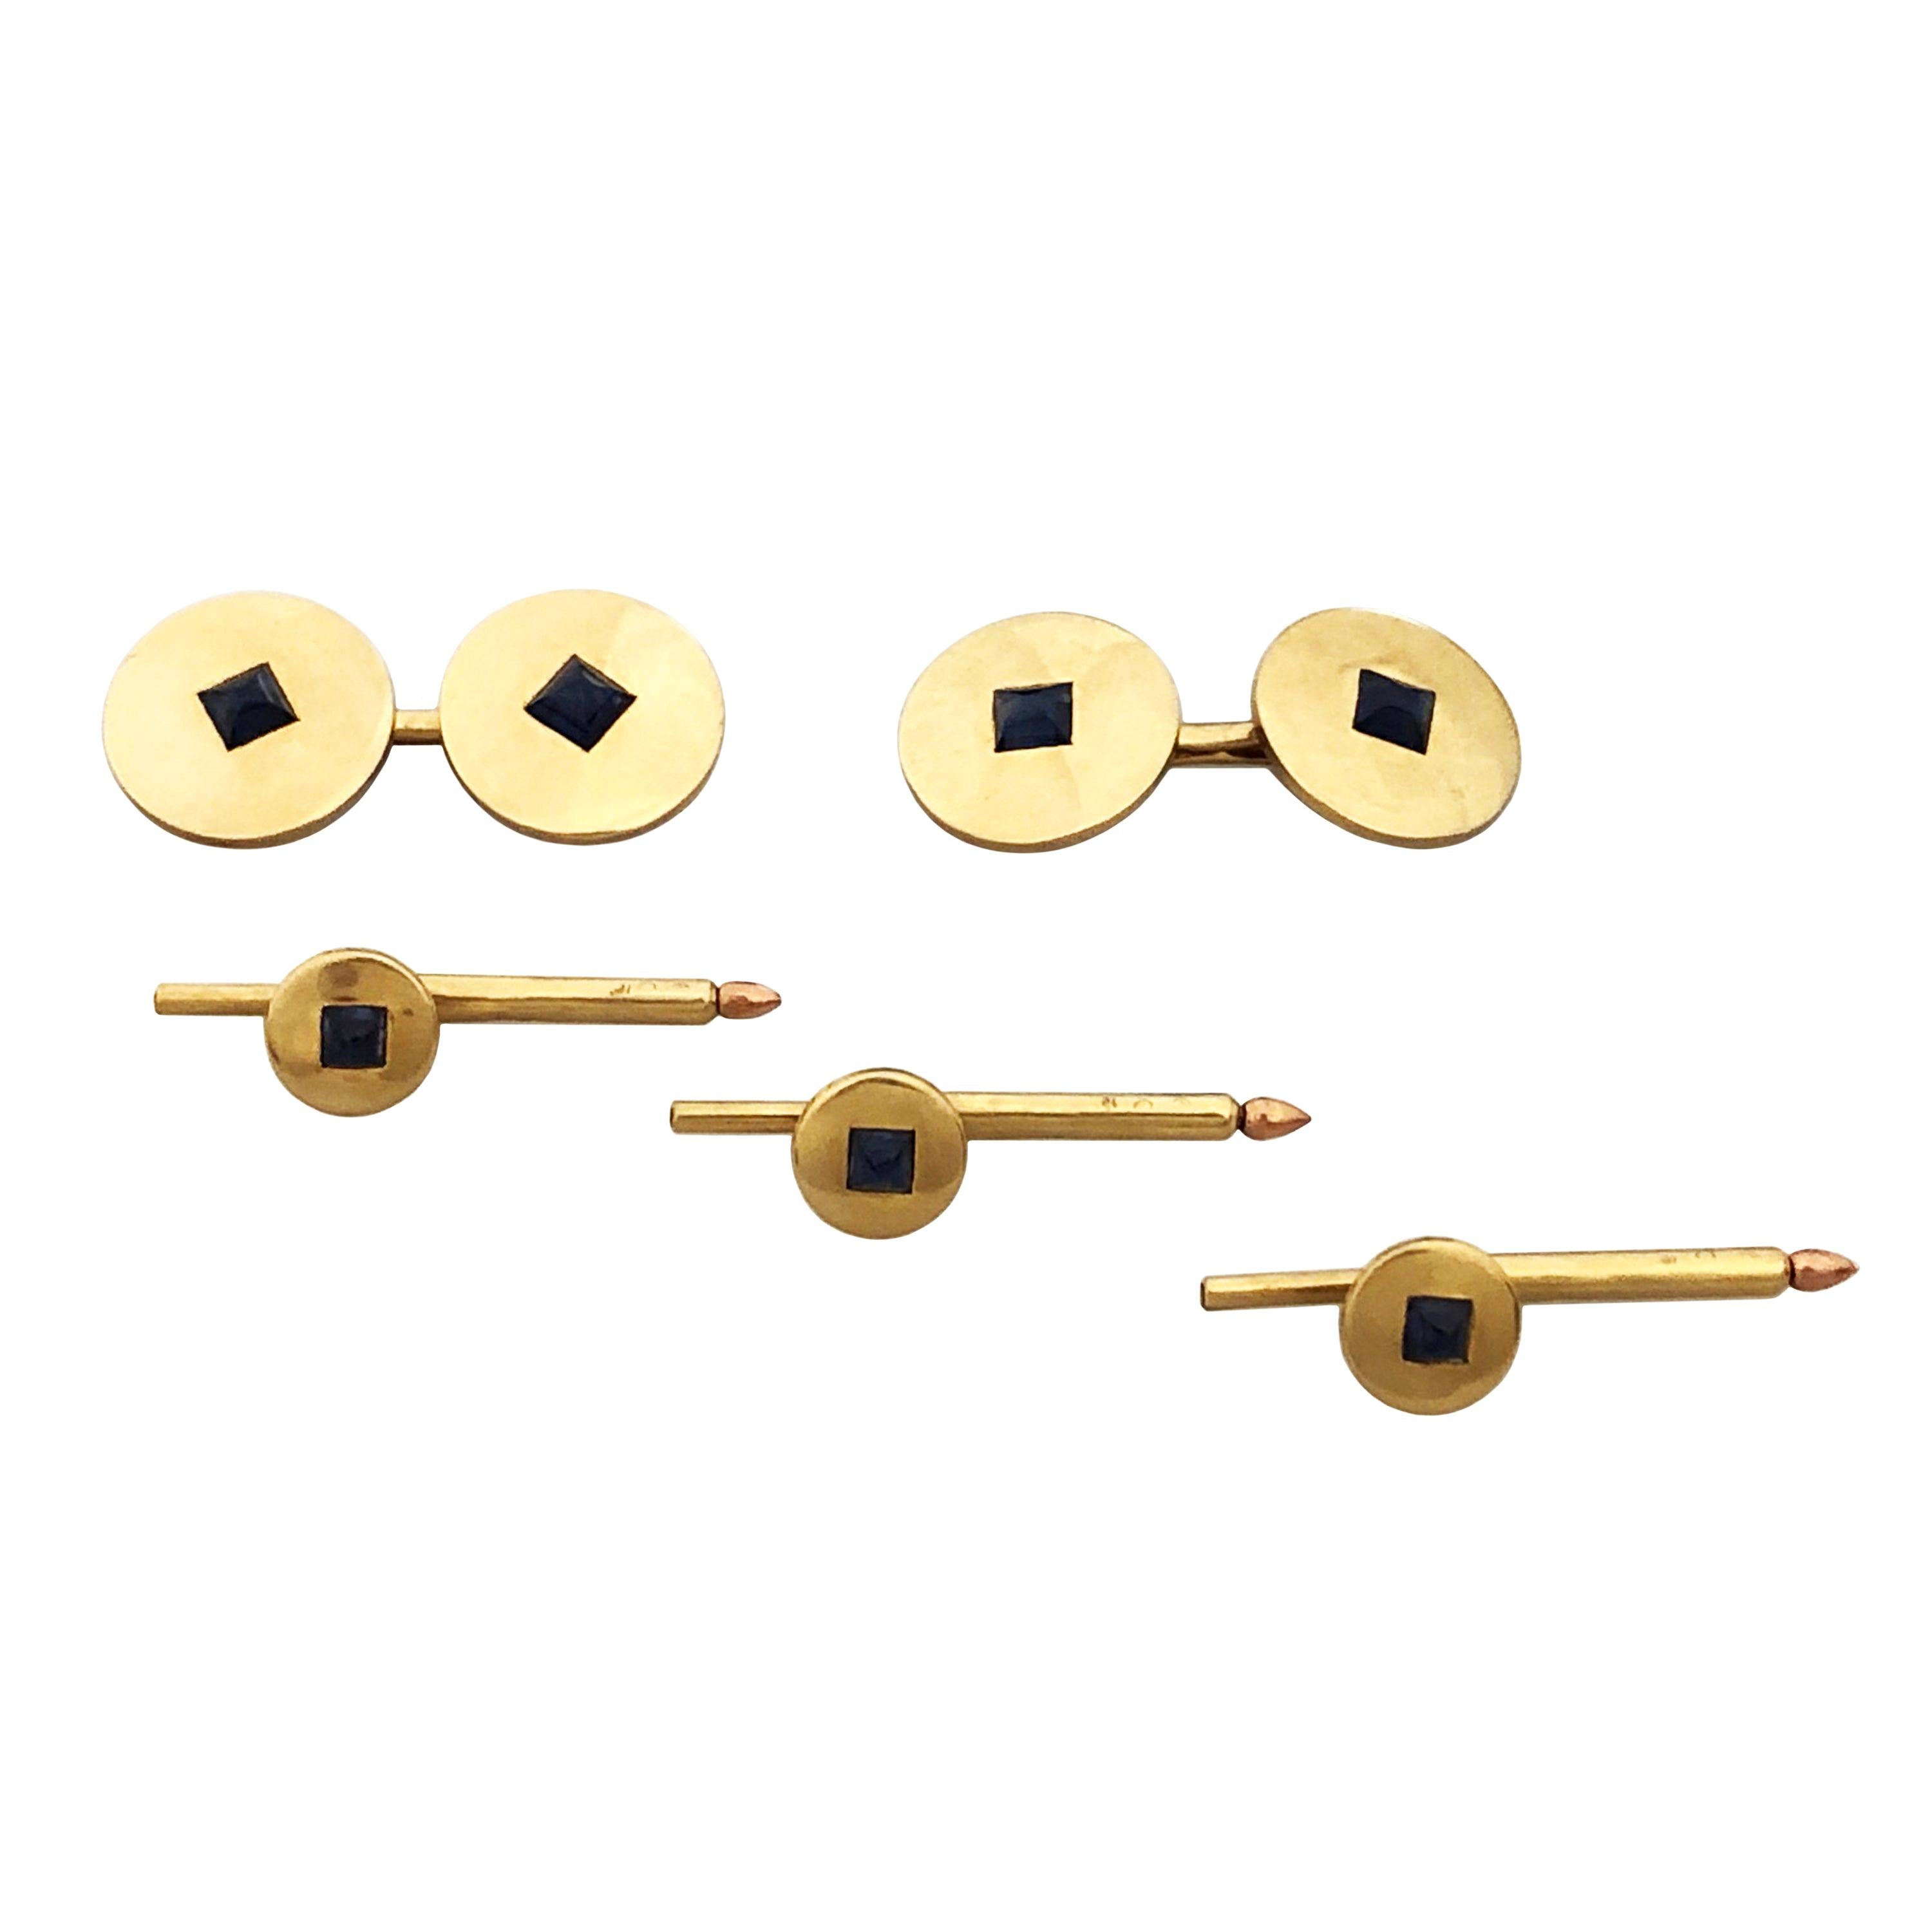 Circa 1940 Cartier Tuxedo dress set, the 14k yellow Gold disk form Cufflinks measure 5/8 inch in Diameter and are centrally set with a Sugar loaf Cabochon Sapphire, the 3 shirt studs each measure 5/16 inch in diameter and are also set with a Sugar